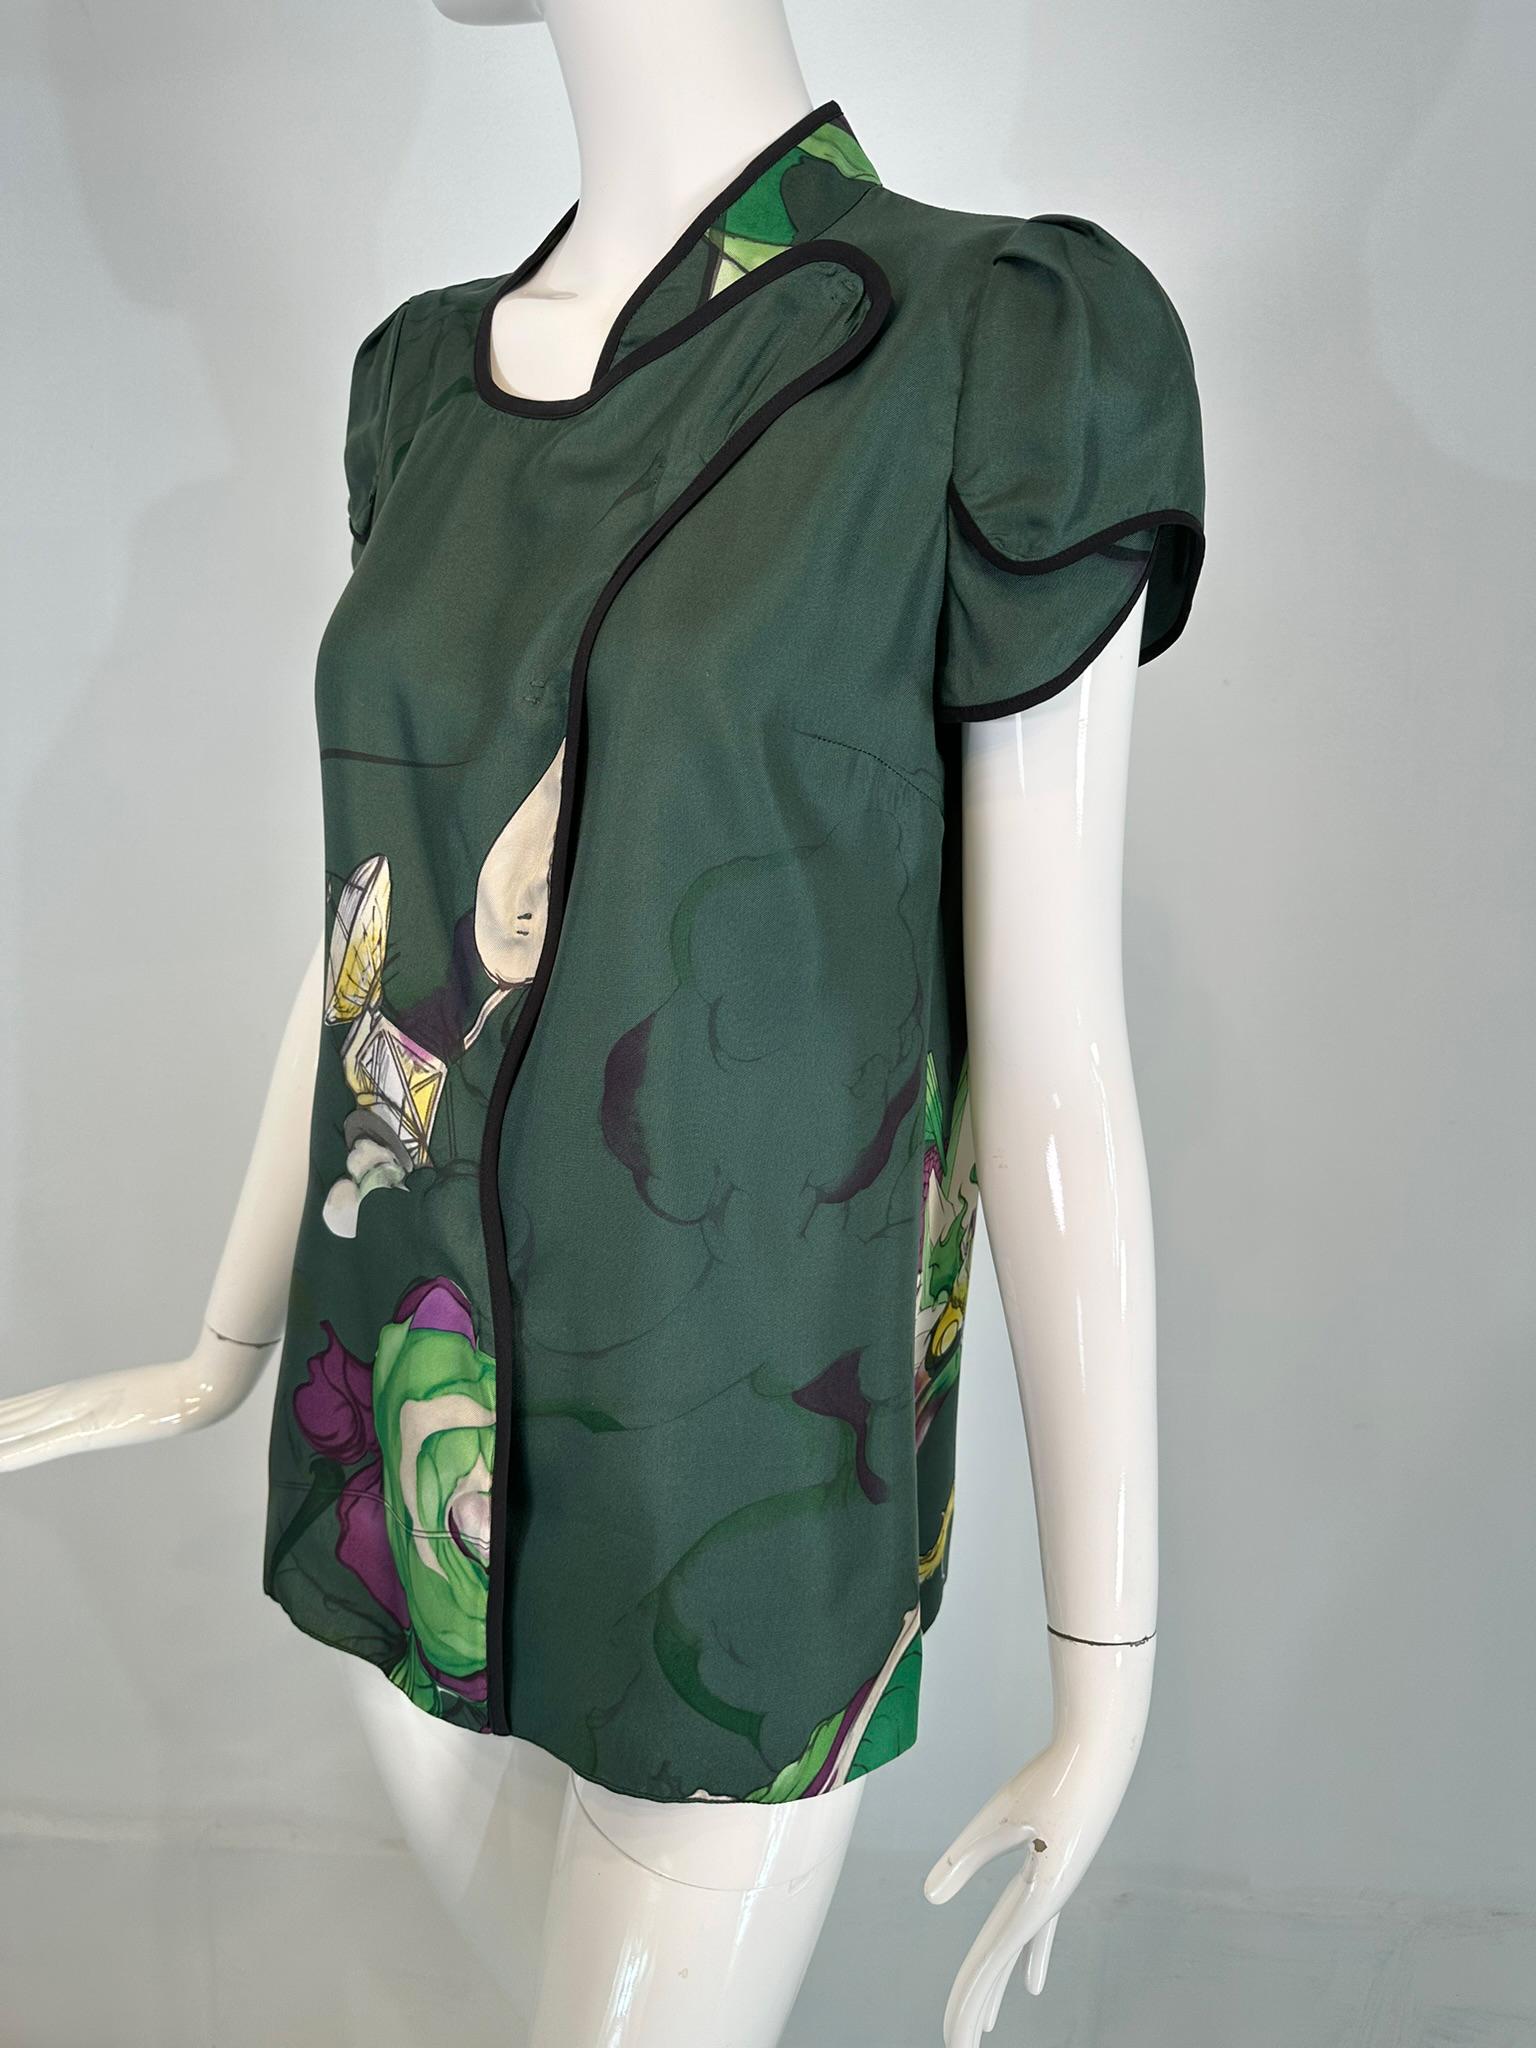 Prada Fairy James Jean Spring 2008 Forest Green Print Silk Top In Good Condition For Sale In West Palm Beach, FL